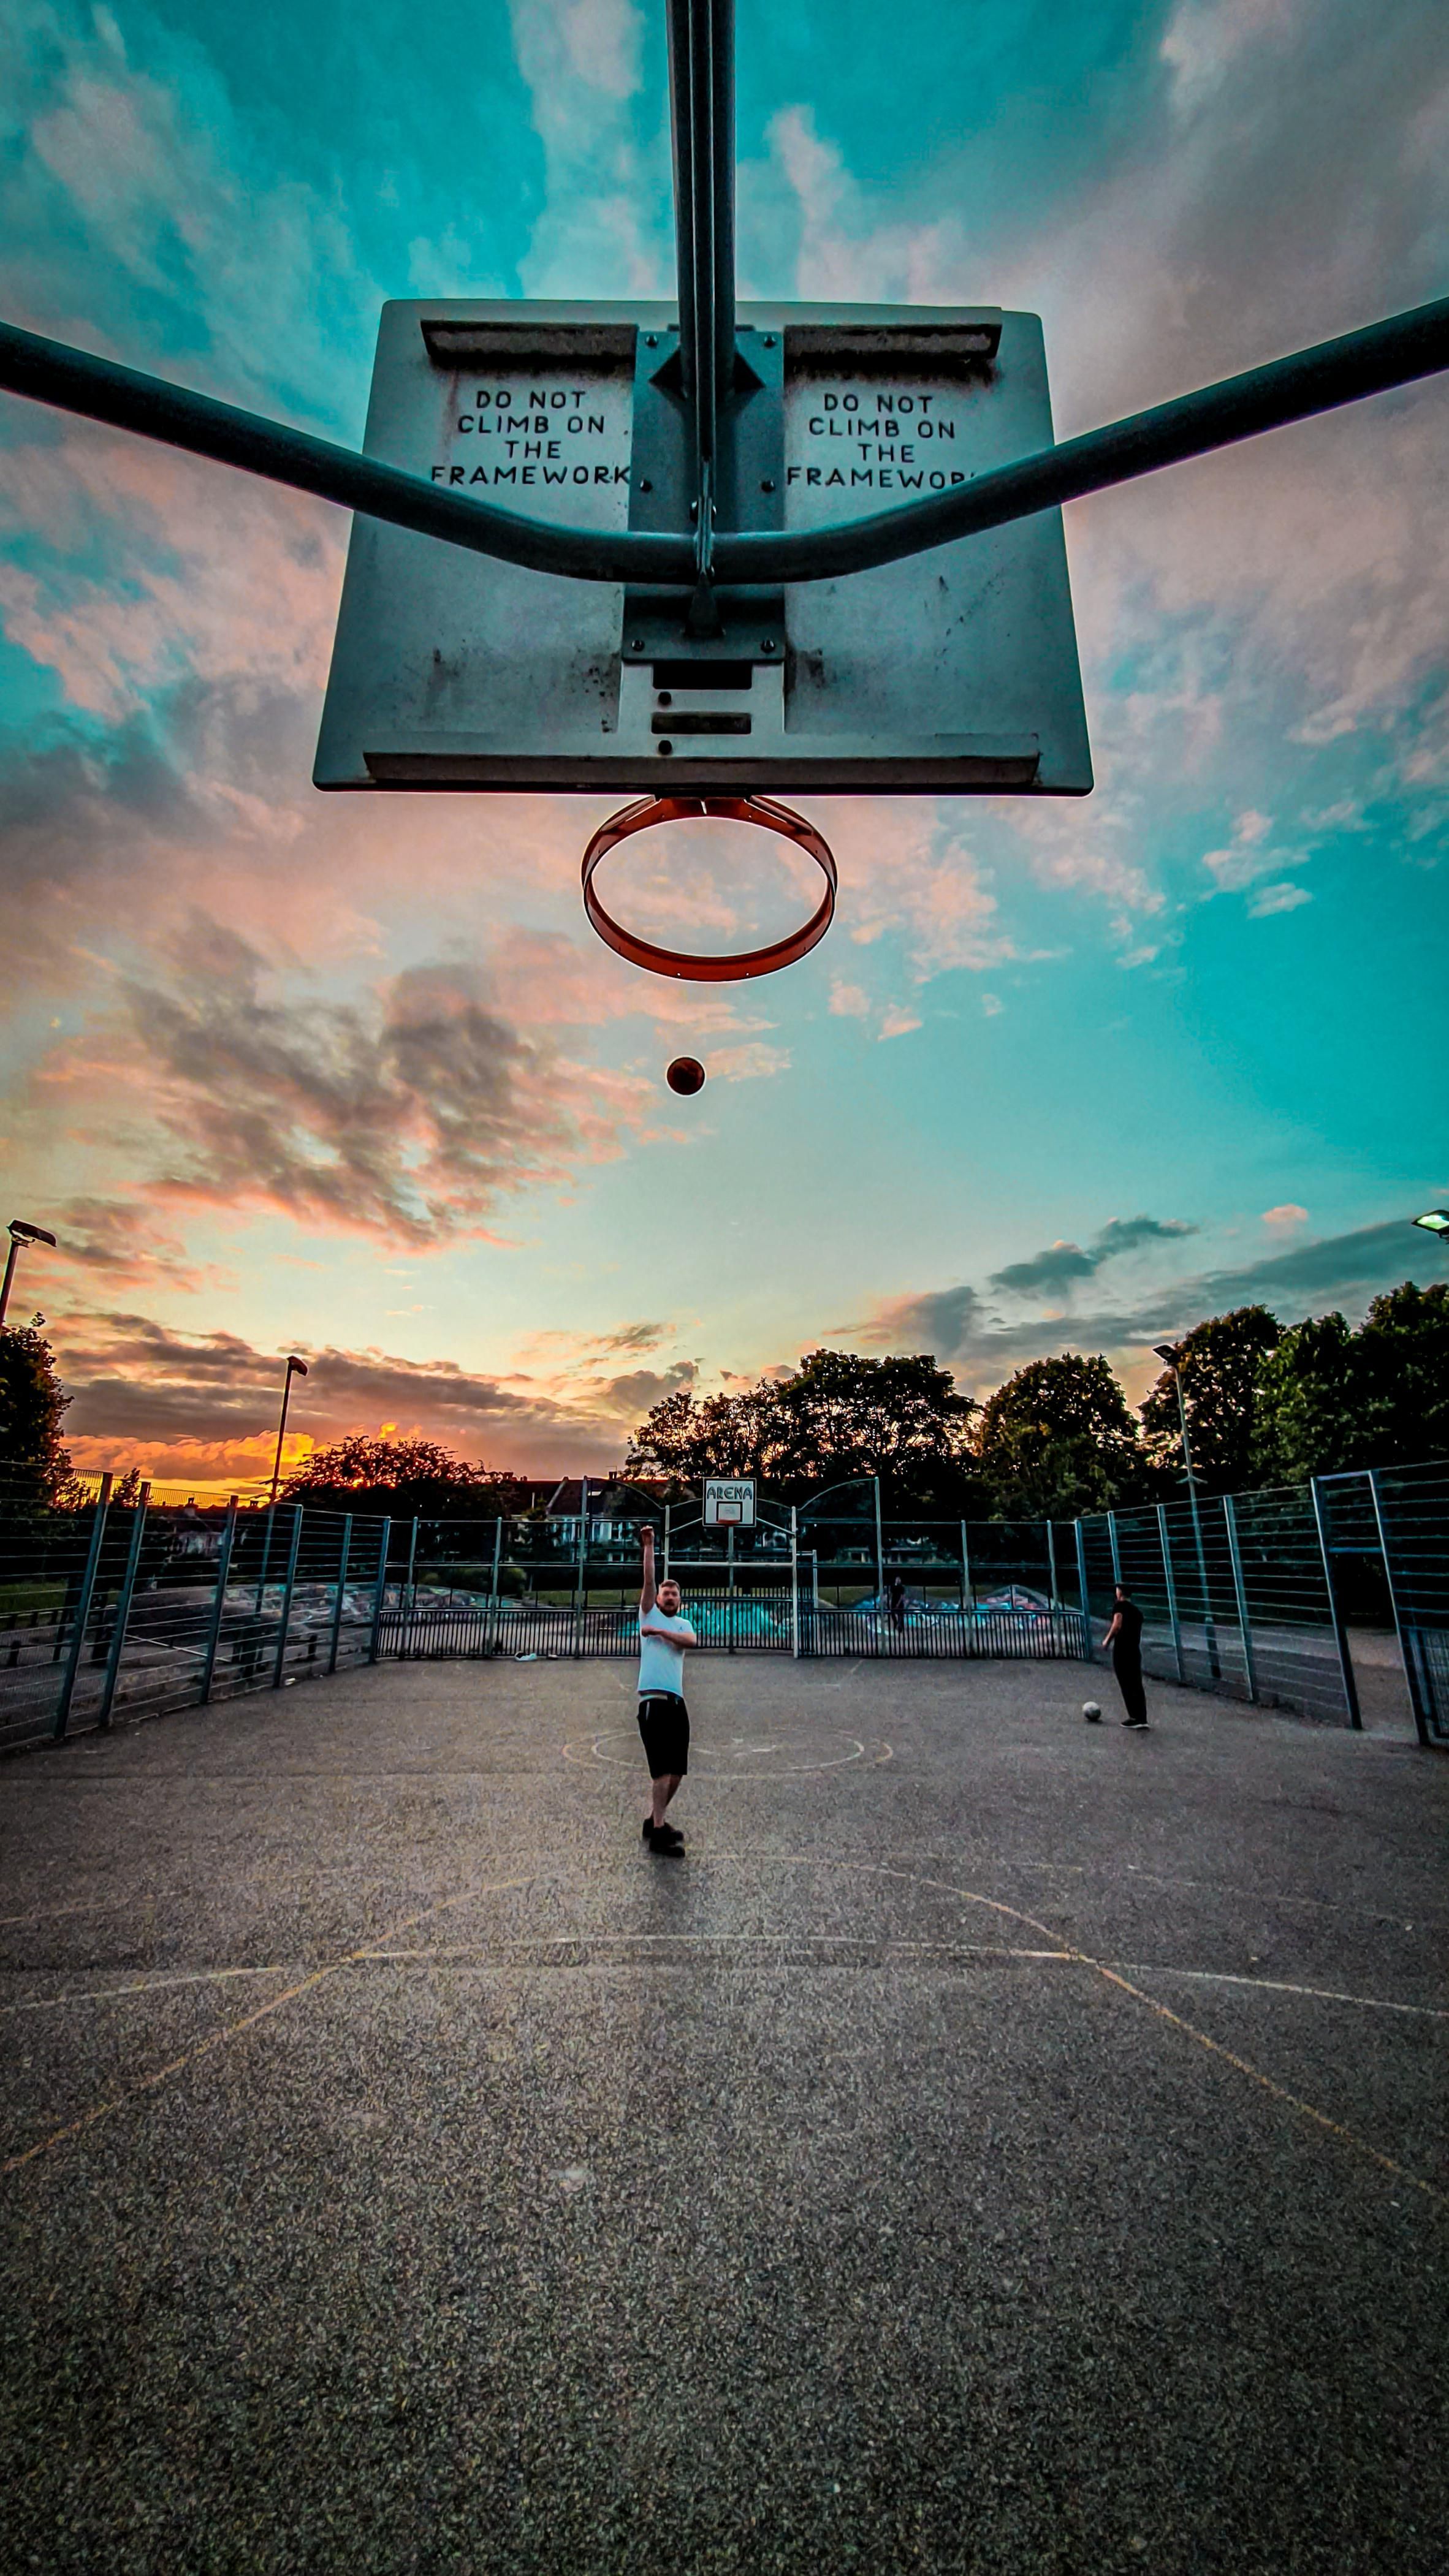 ITAP of basketball court during sunset.#PHOTO #CAPTURE #NATURE #INCREDIBLE. Fond d'écran téléphone, Fond d'ecran dessin, Fond d'ecran pastel